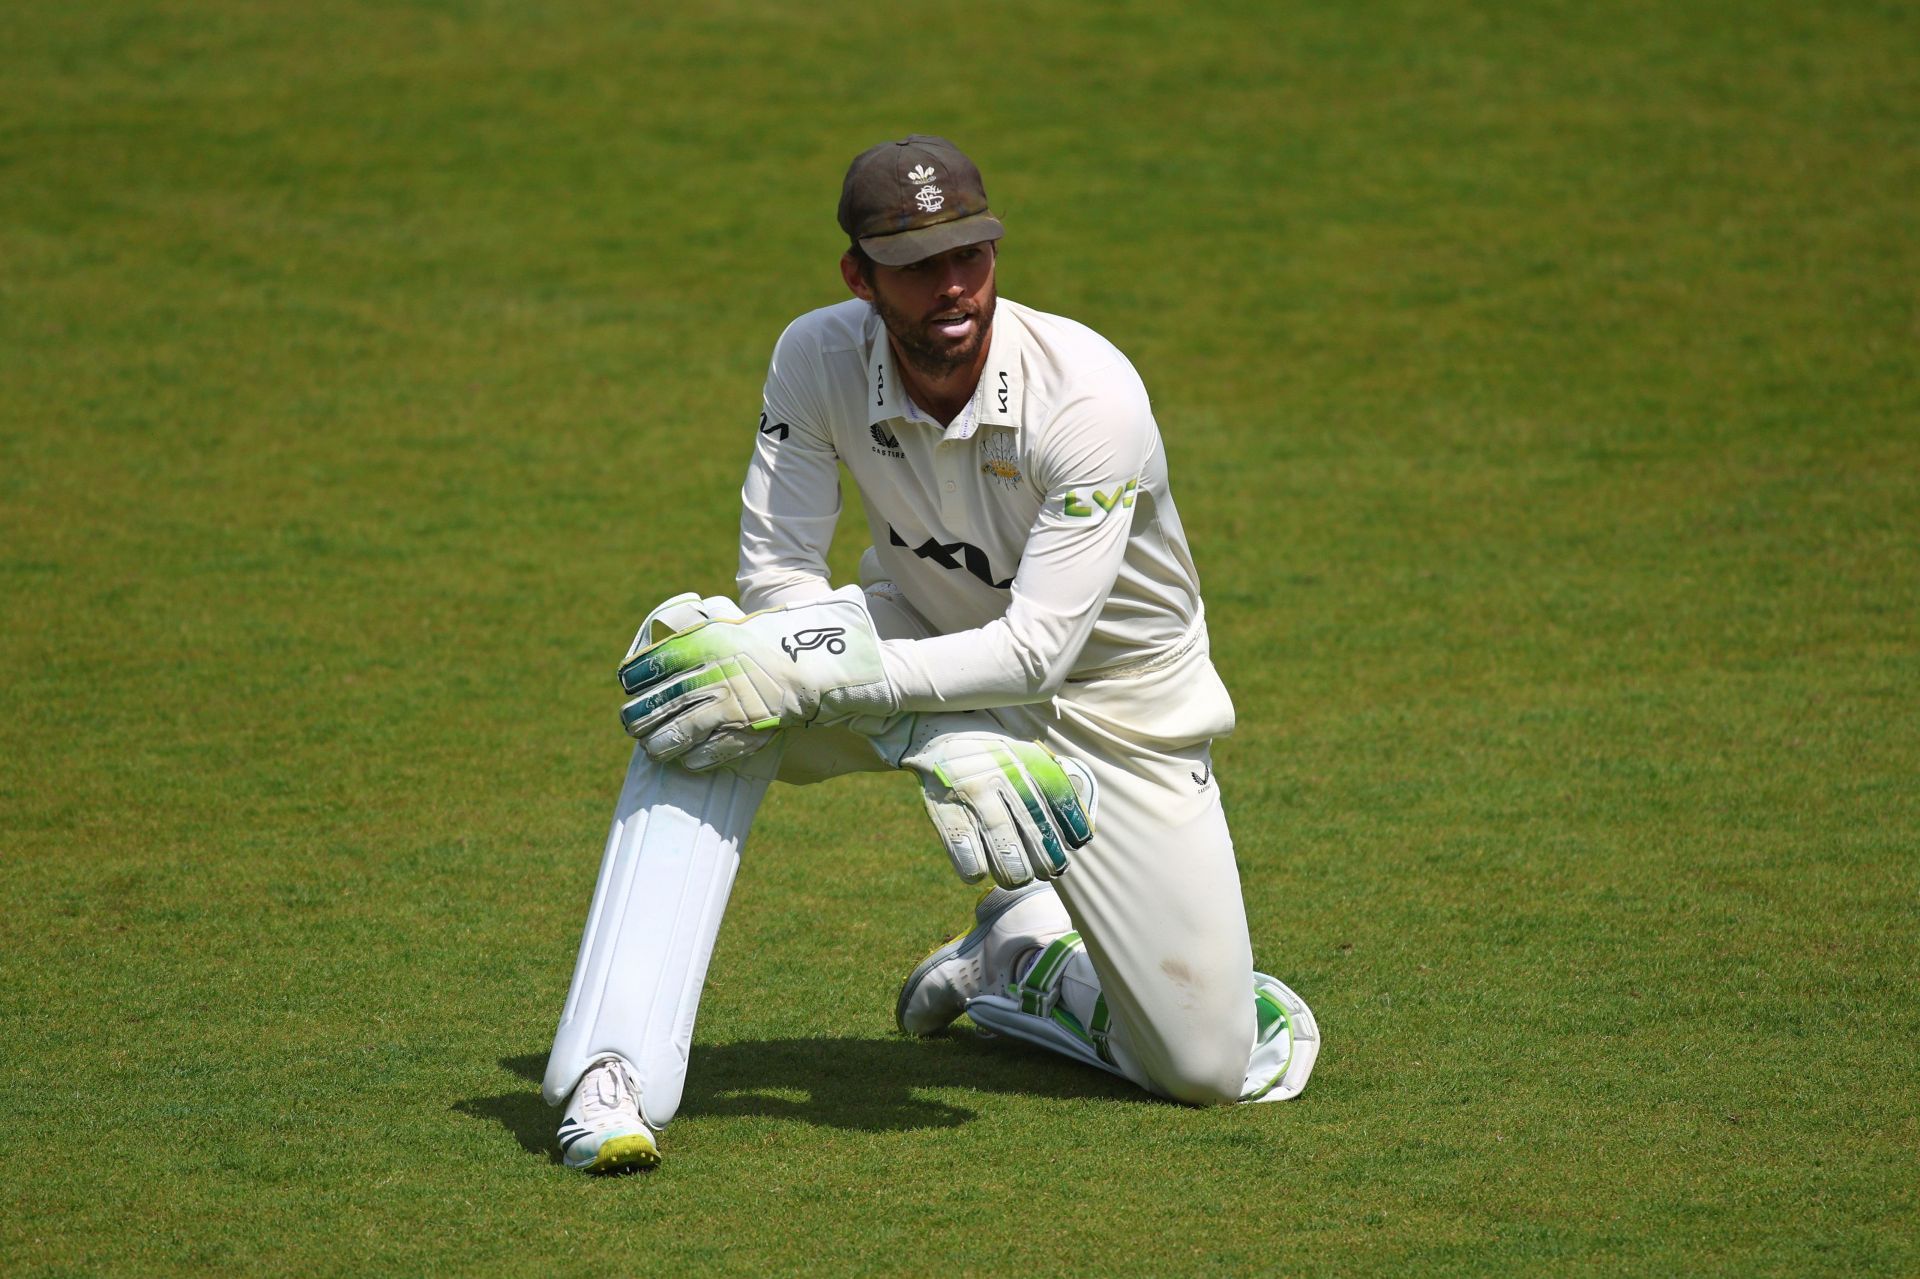 Ben Foakes can be included as a regular wicket-keeper